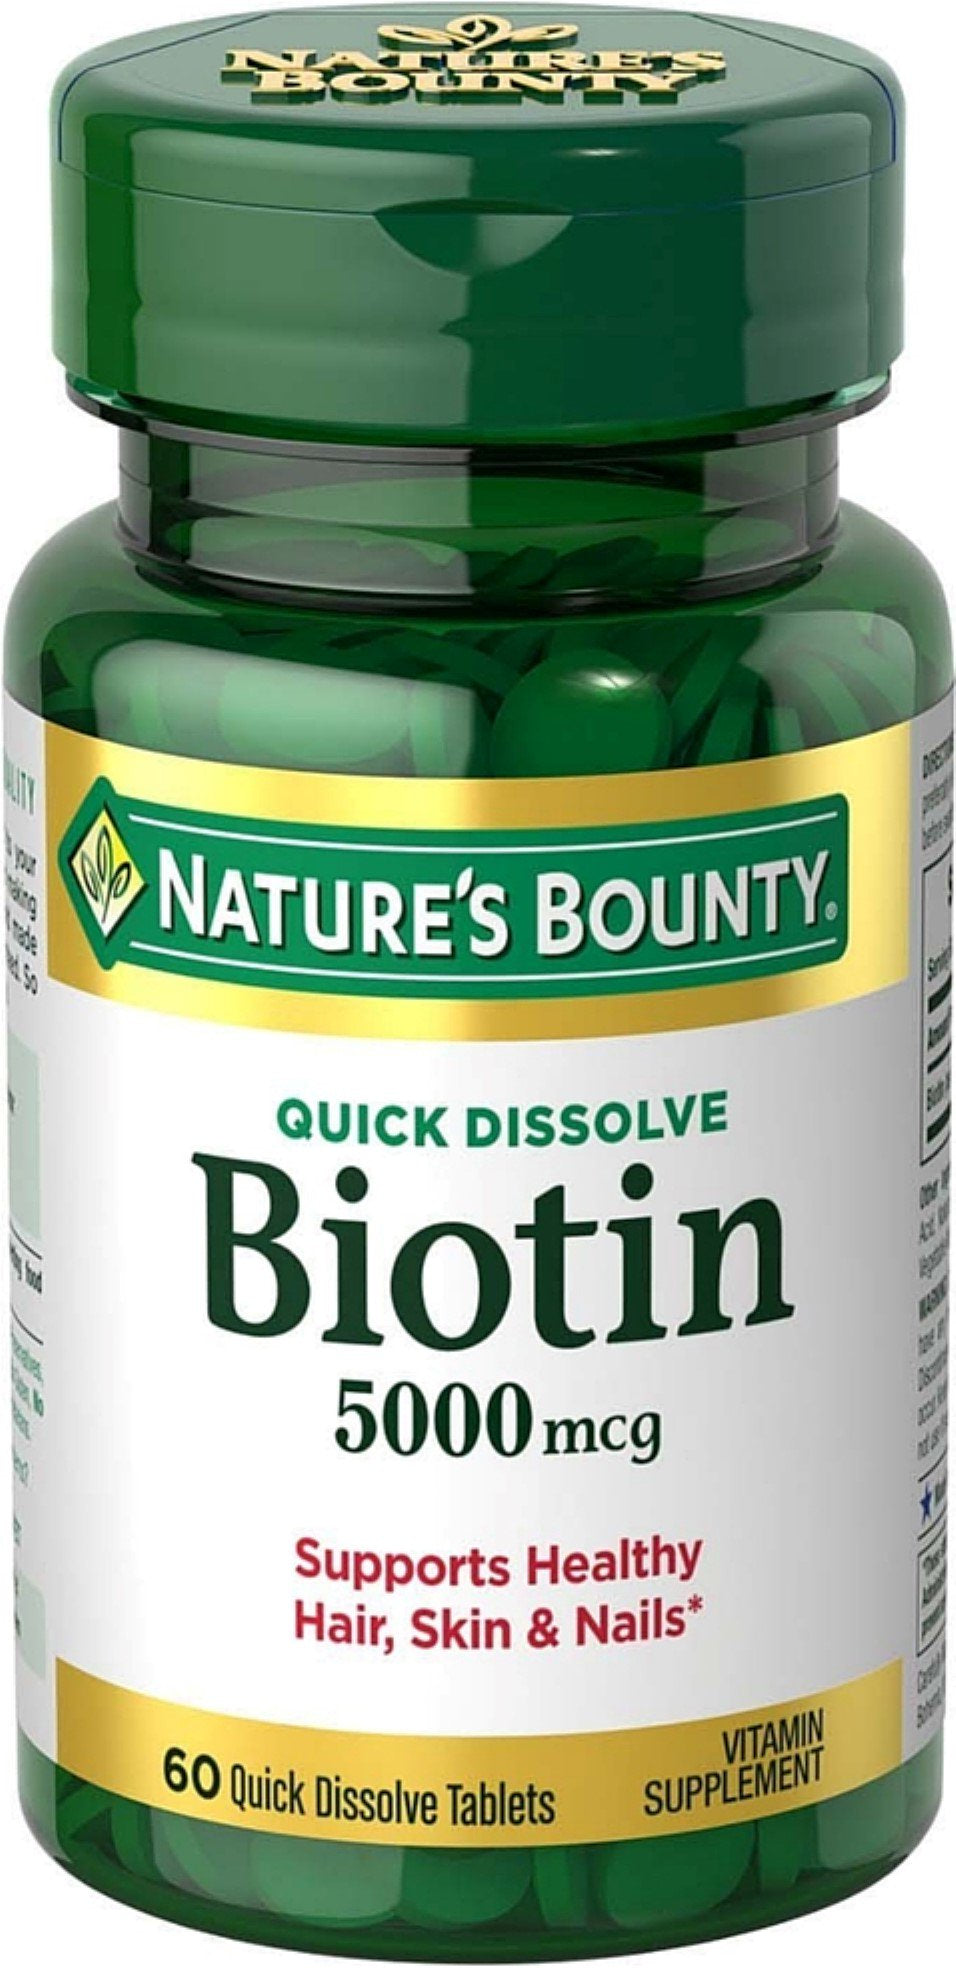 Nature'S Bounty Biotin 5000 Mcg Quick Dissolve Tablets 60 Each - (Pack of 3)